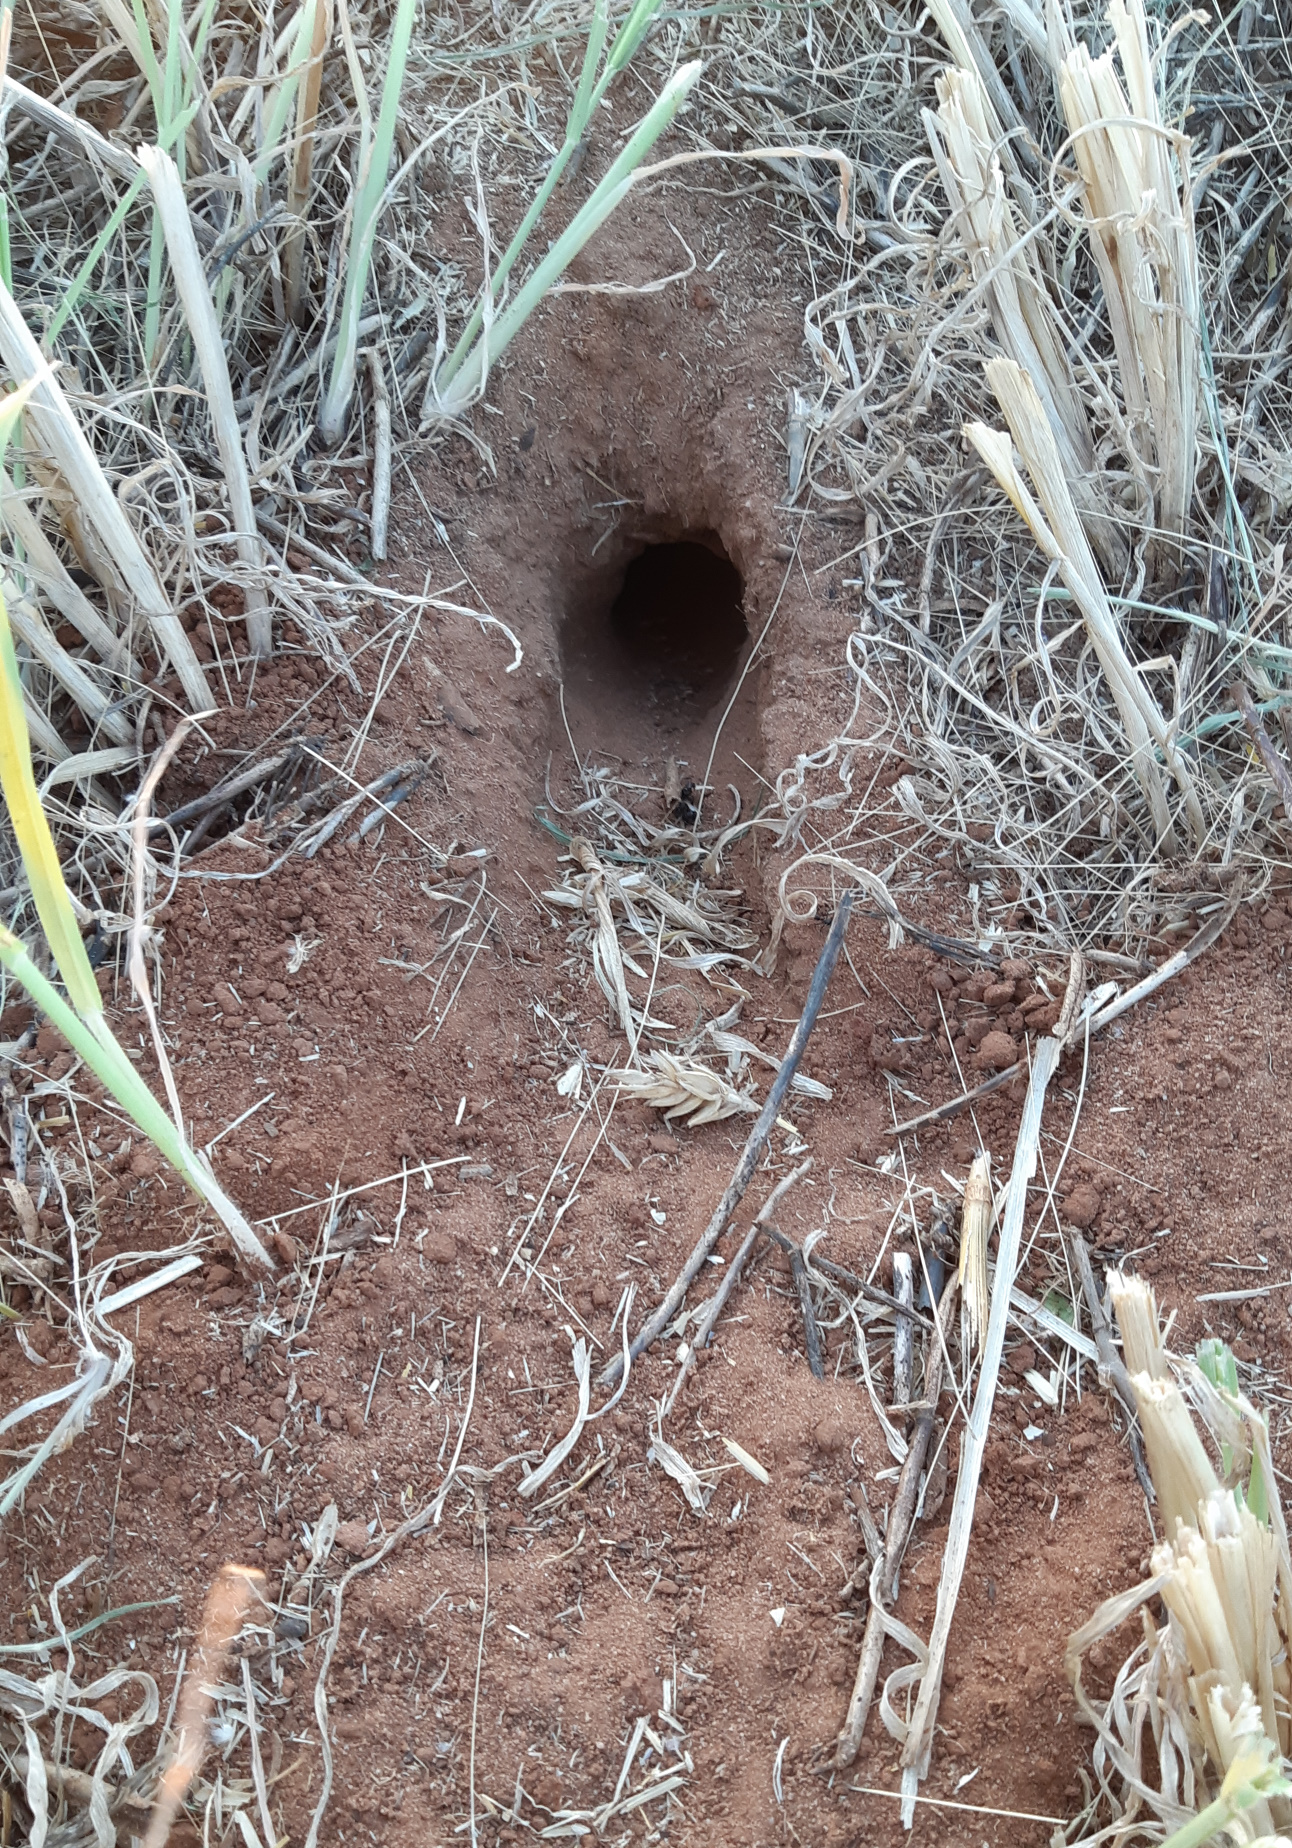 Image of mouse burrow